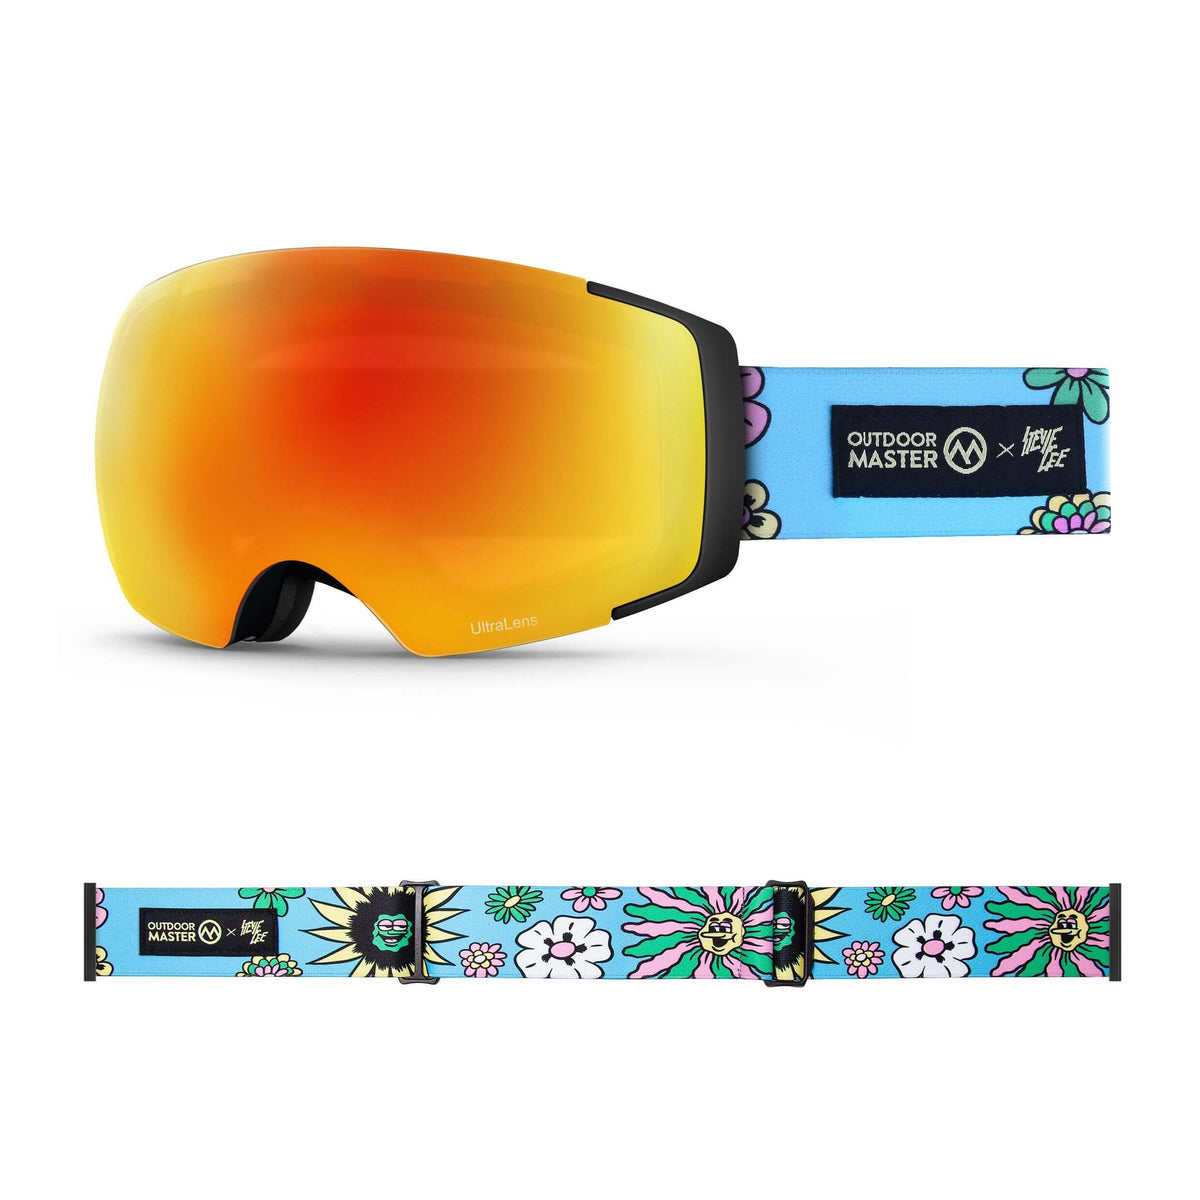 OutdoorMaster x Stevie Gee Goggles Pro Series Limited Edition OutdoorMaster